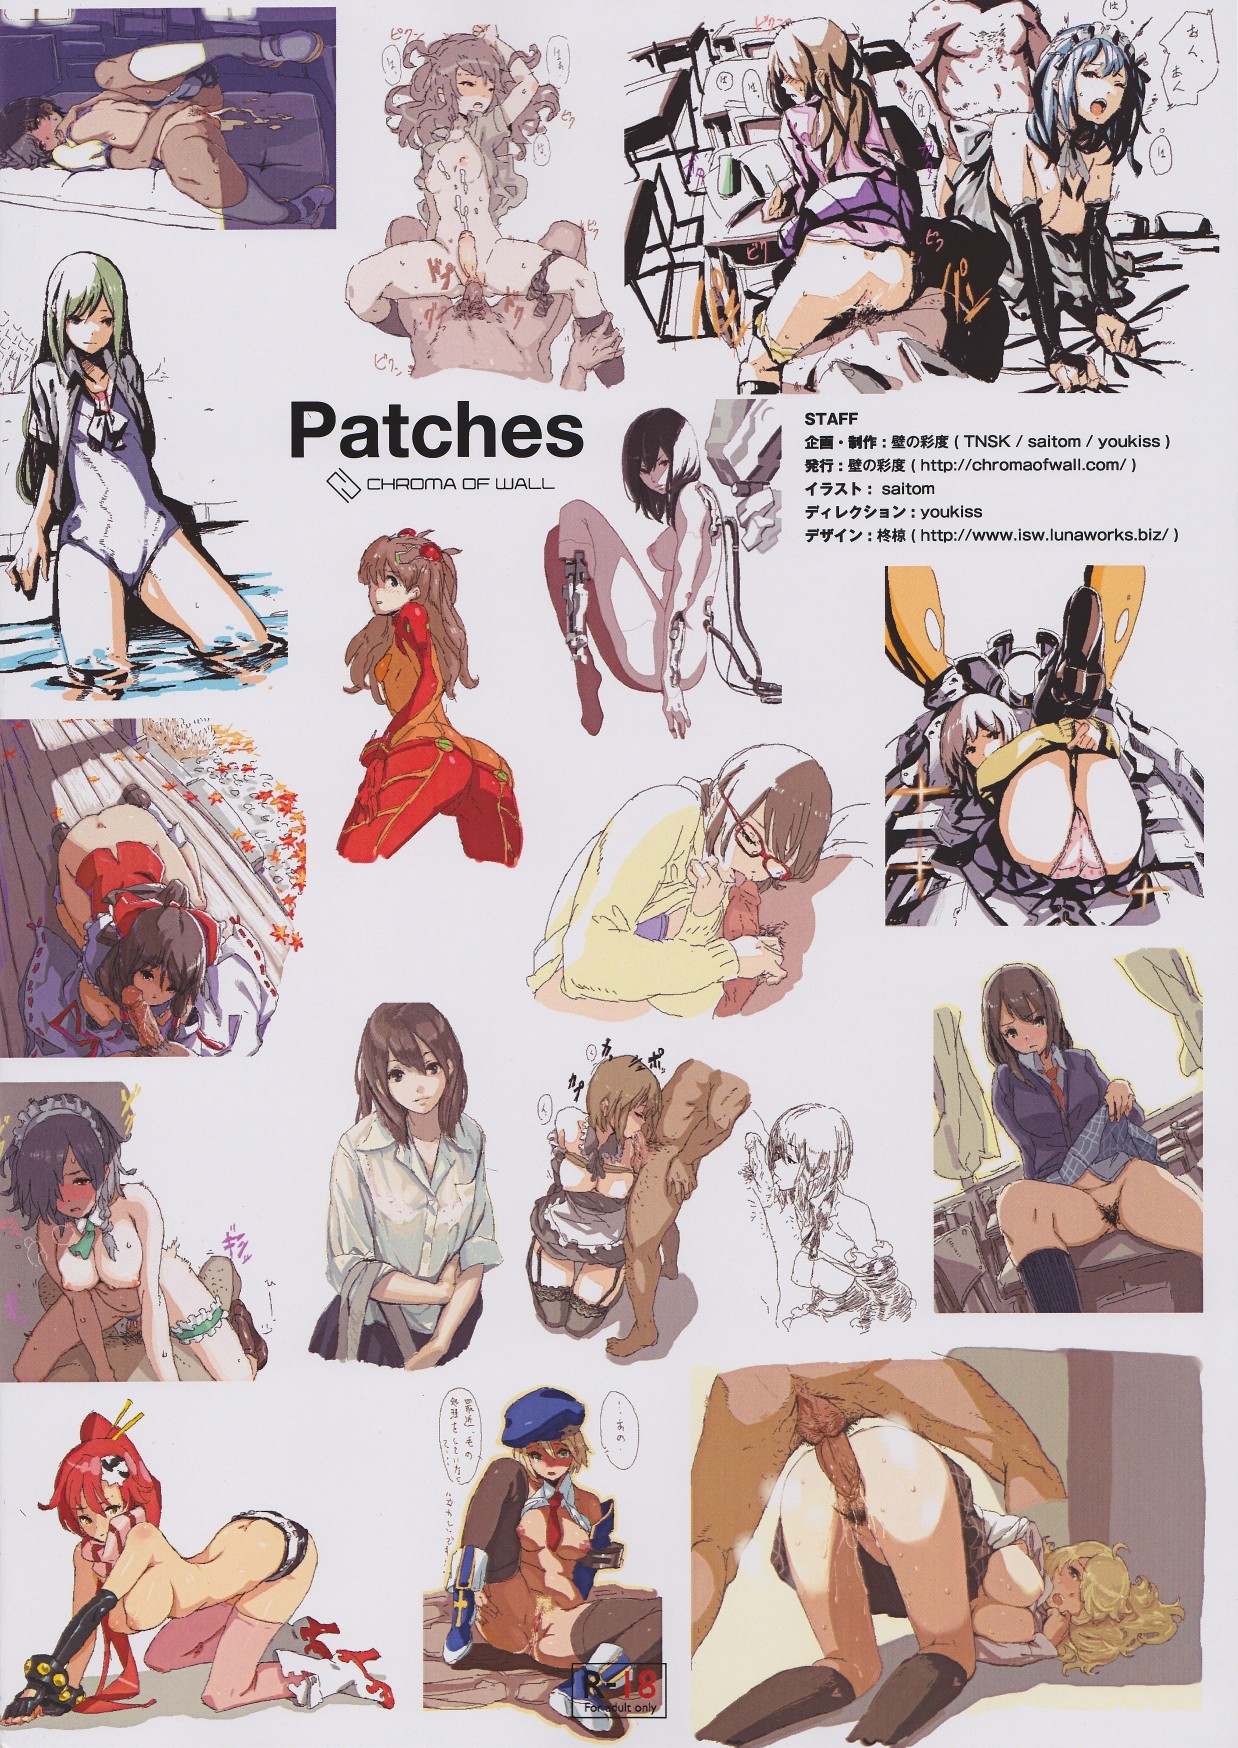 [Chroma of Wall (saitom)] Patches (Various) page 3 full